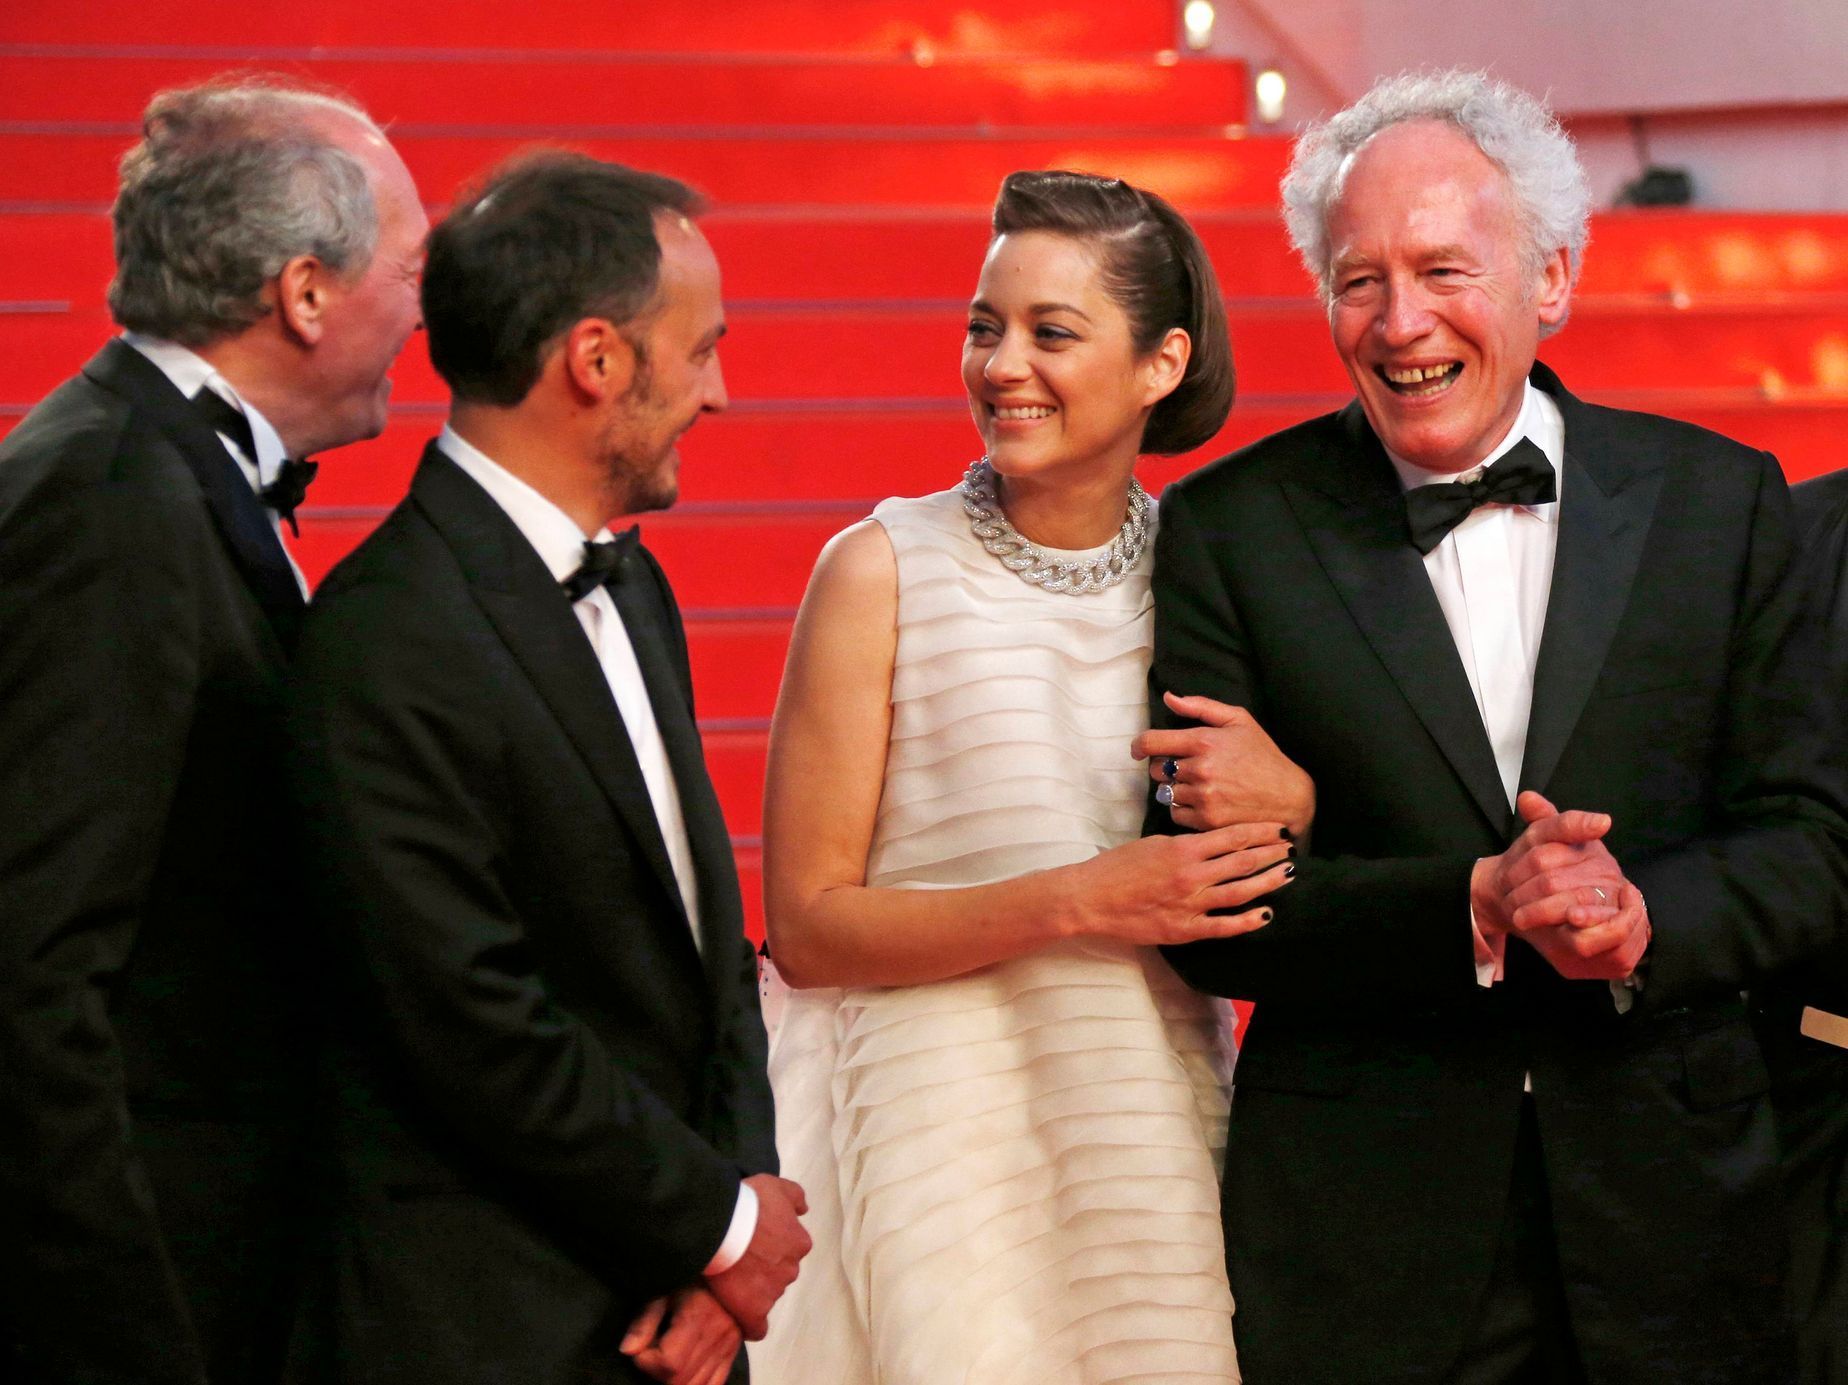 Directors Jean-Pierre and Luc Dardenne, cast members Marion Cotillard and Fabrizio Rongione pose on the red carpet as they leave after the screening of the film &quot;Deux jours, une nuit&quot; at the